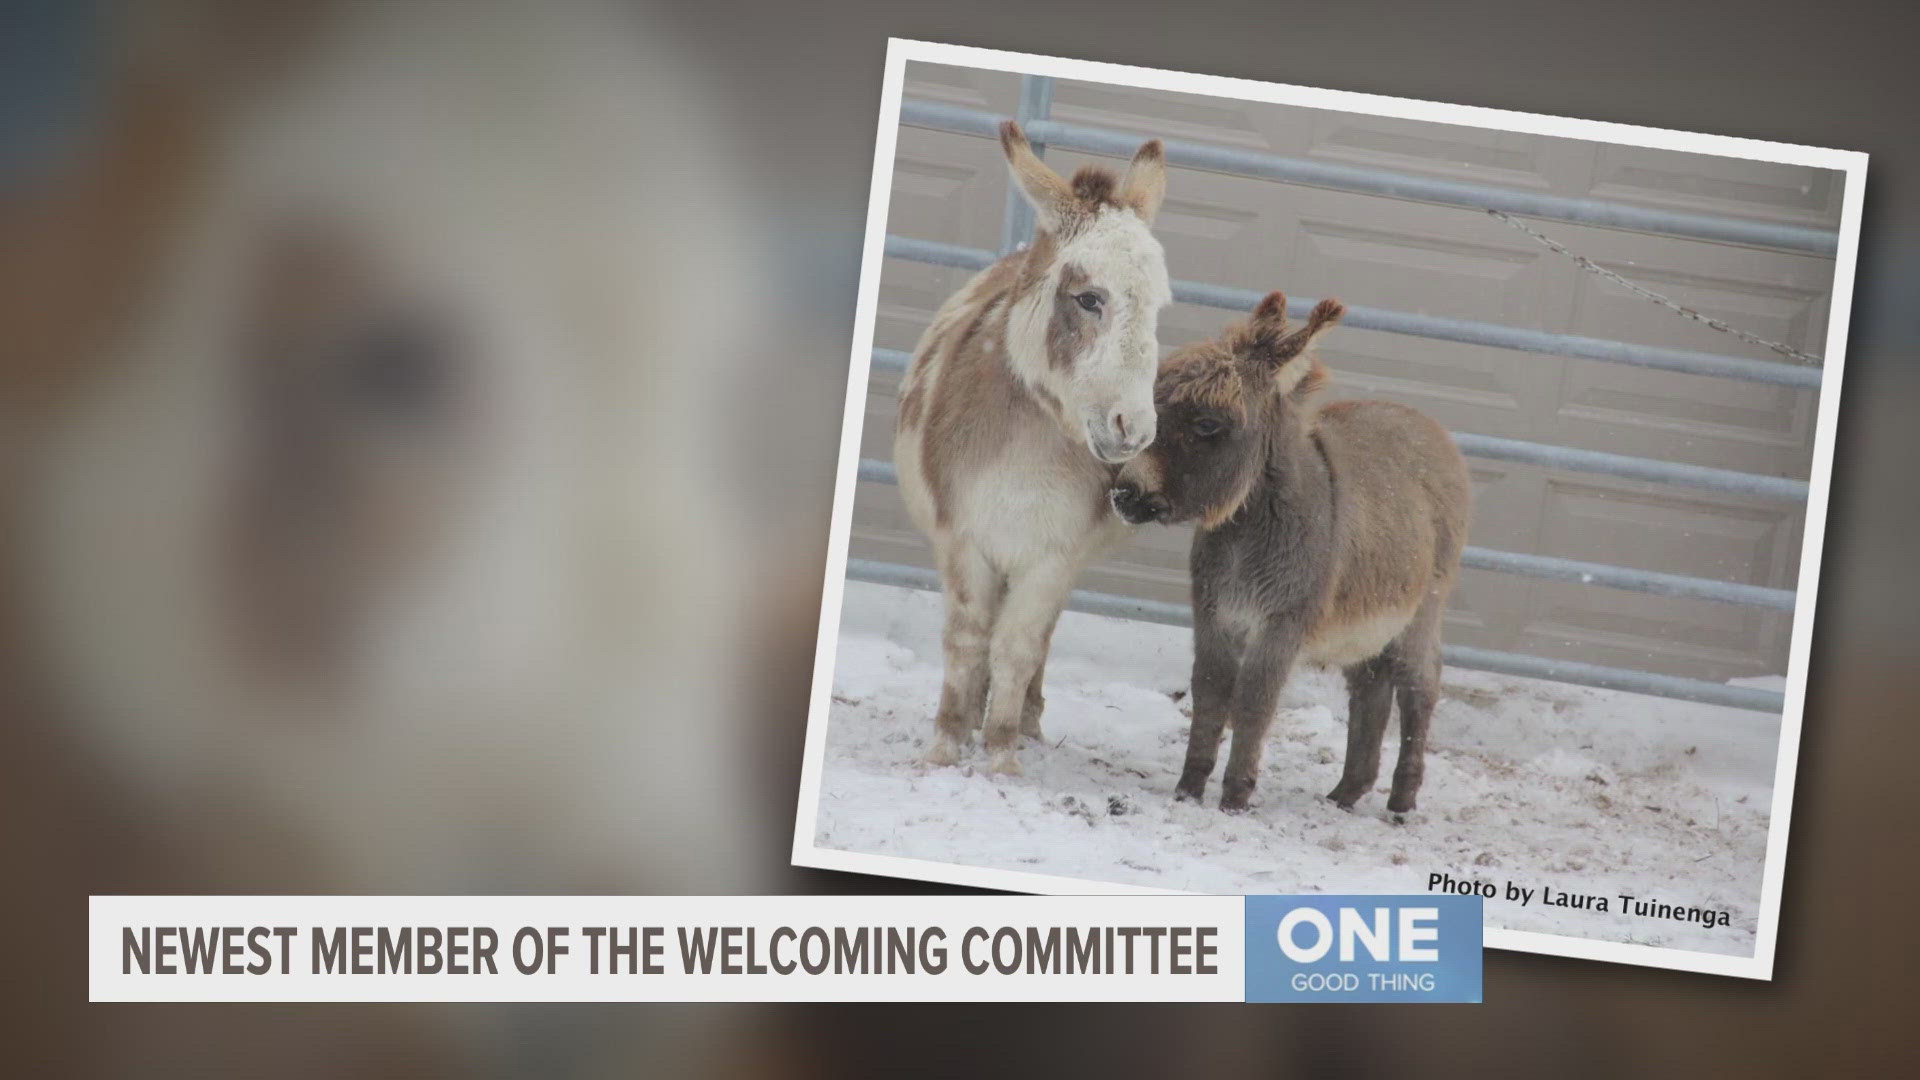 In January, a donkey known as Squiggles lost his best friend, but the staff at Fellinlove Farm stepped up to quickly find Squiggles a brother.